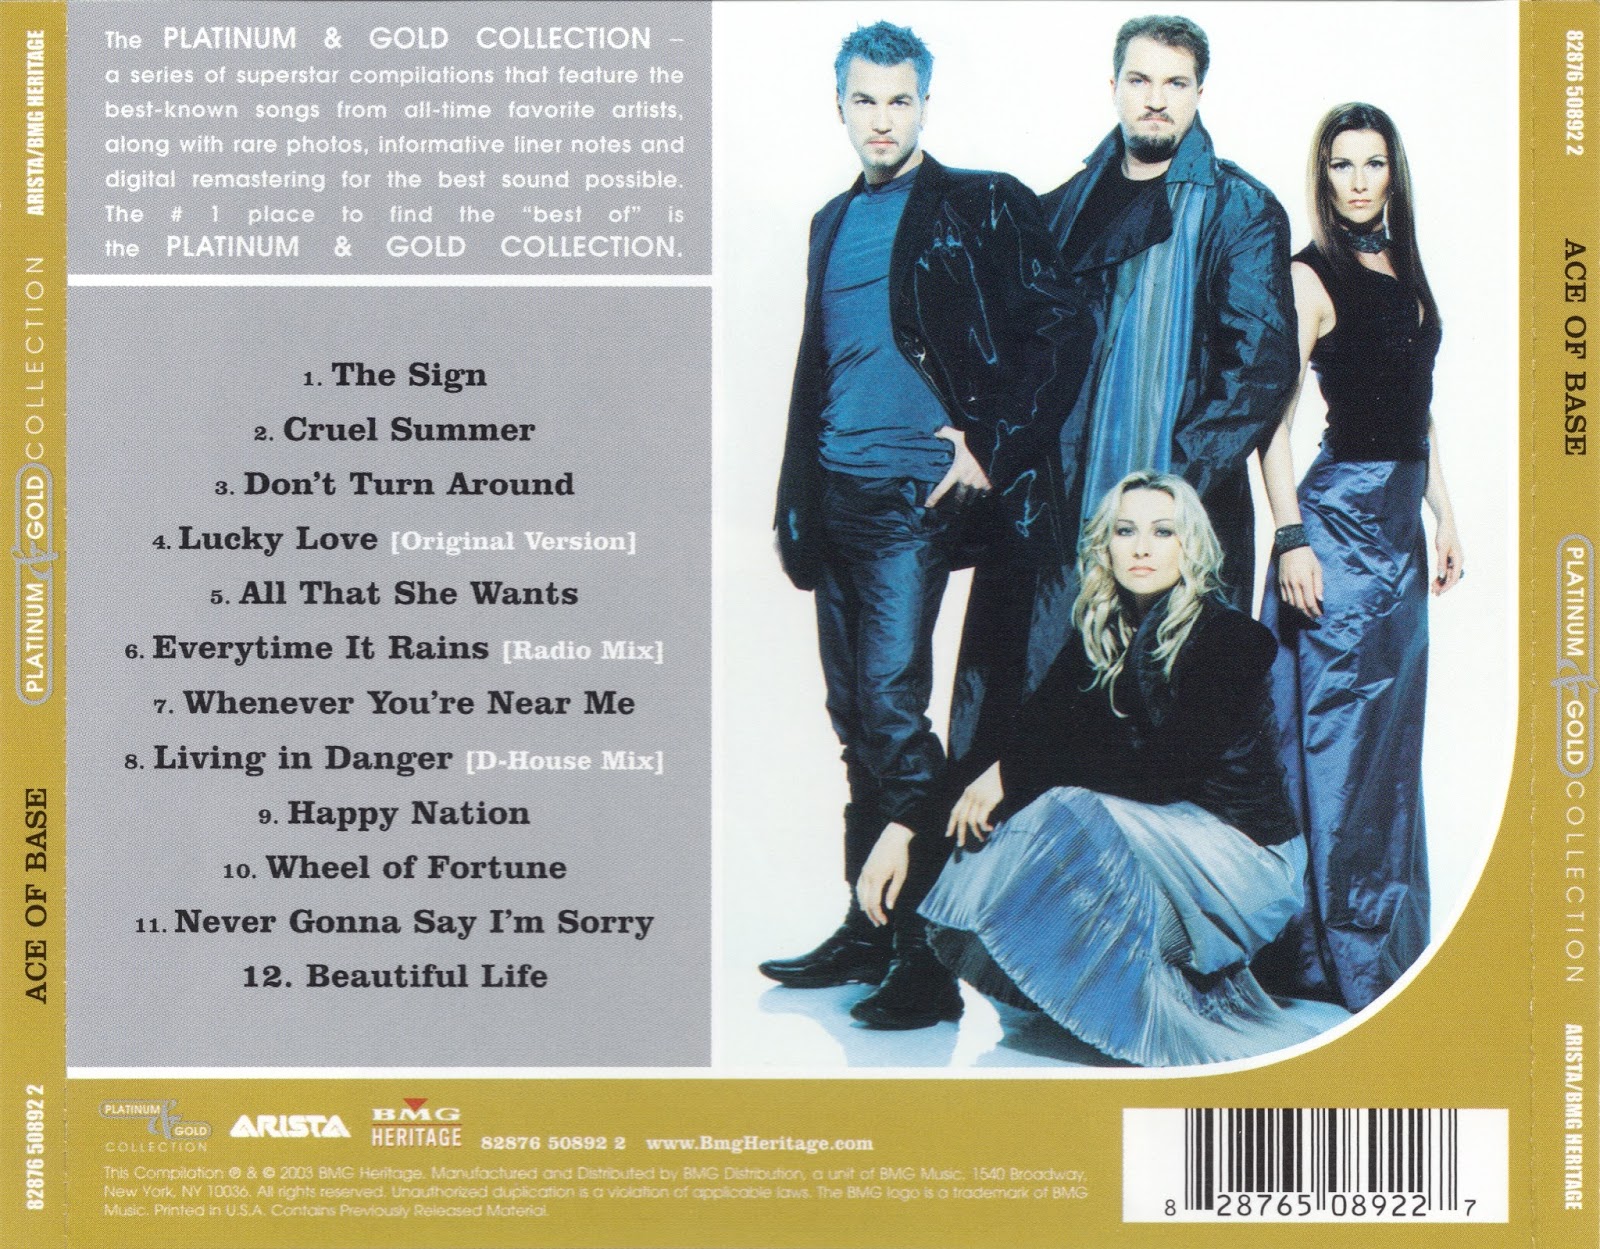 Хапинейшен текст. Ace of Base 2003. Ace of Base - the best of (Platinum & Gold collection) (2003) обложка. Platinum & Gold collection (2003). The best of (Platinum & Gold collection.